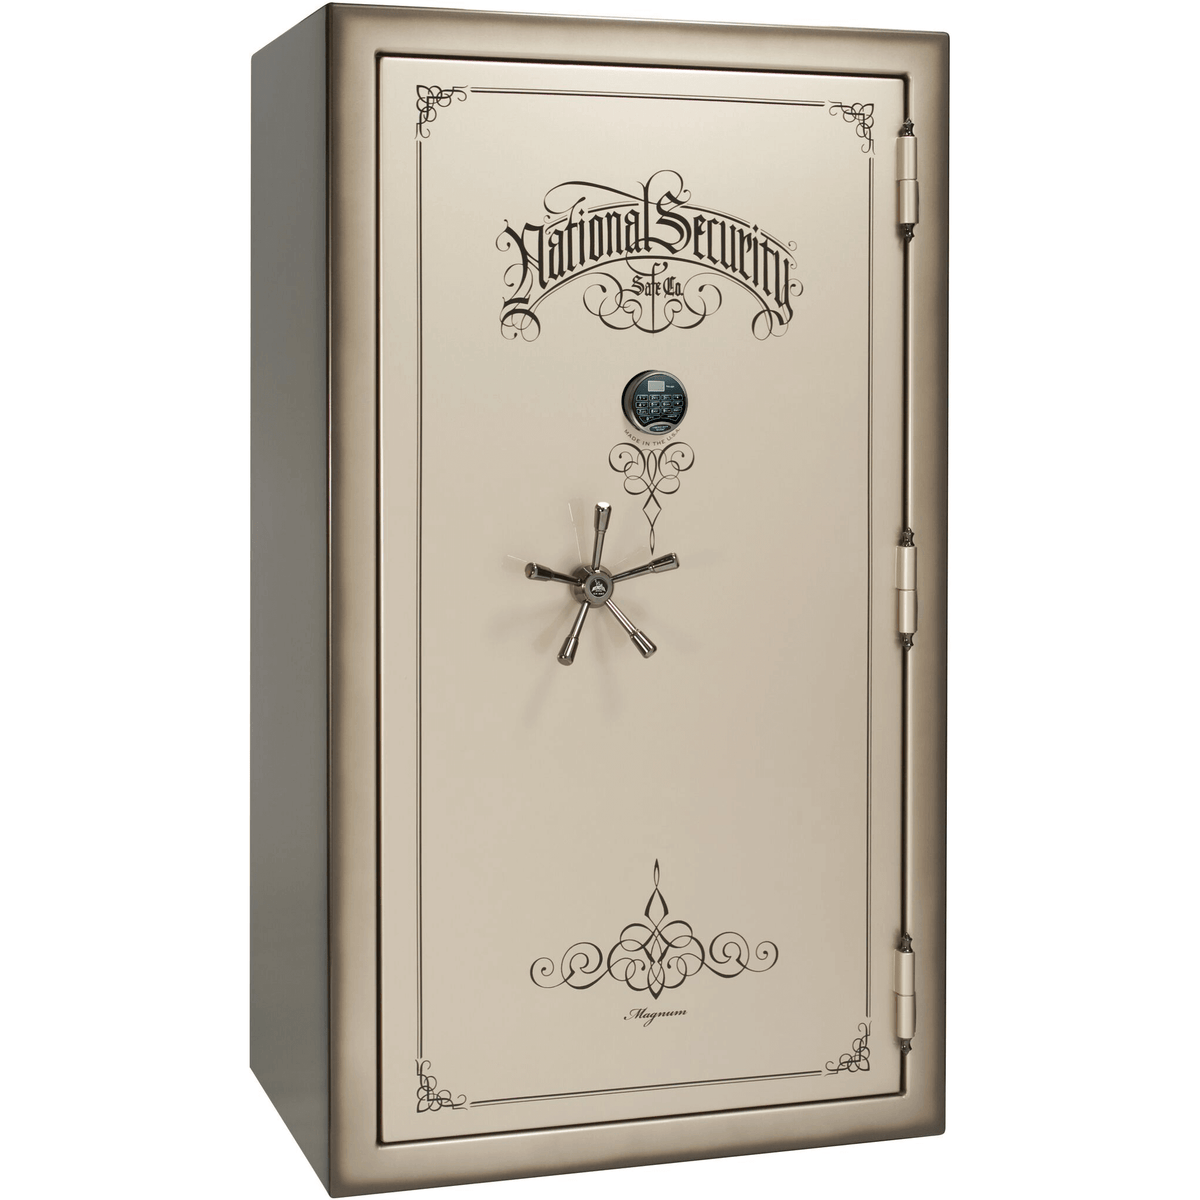 Liberty Safe National Magnum 50 in Champagne Feathered Edge Gloss with Black Chrome Electronic Lock, closed door.